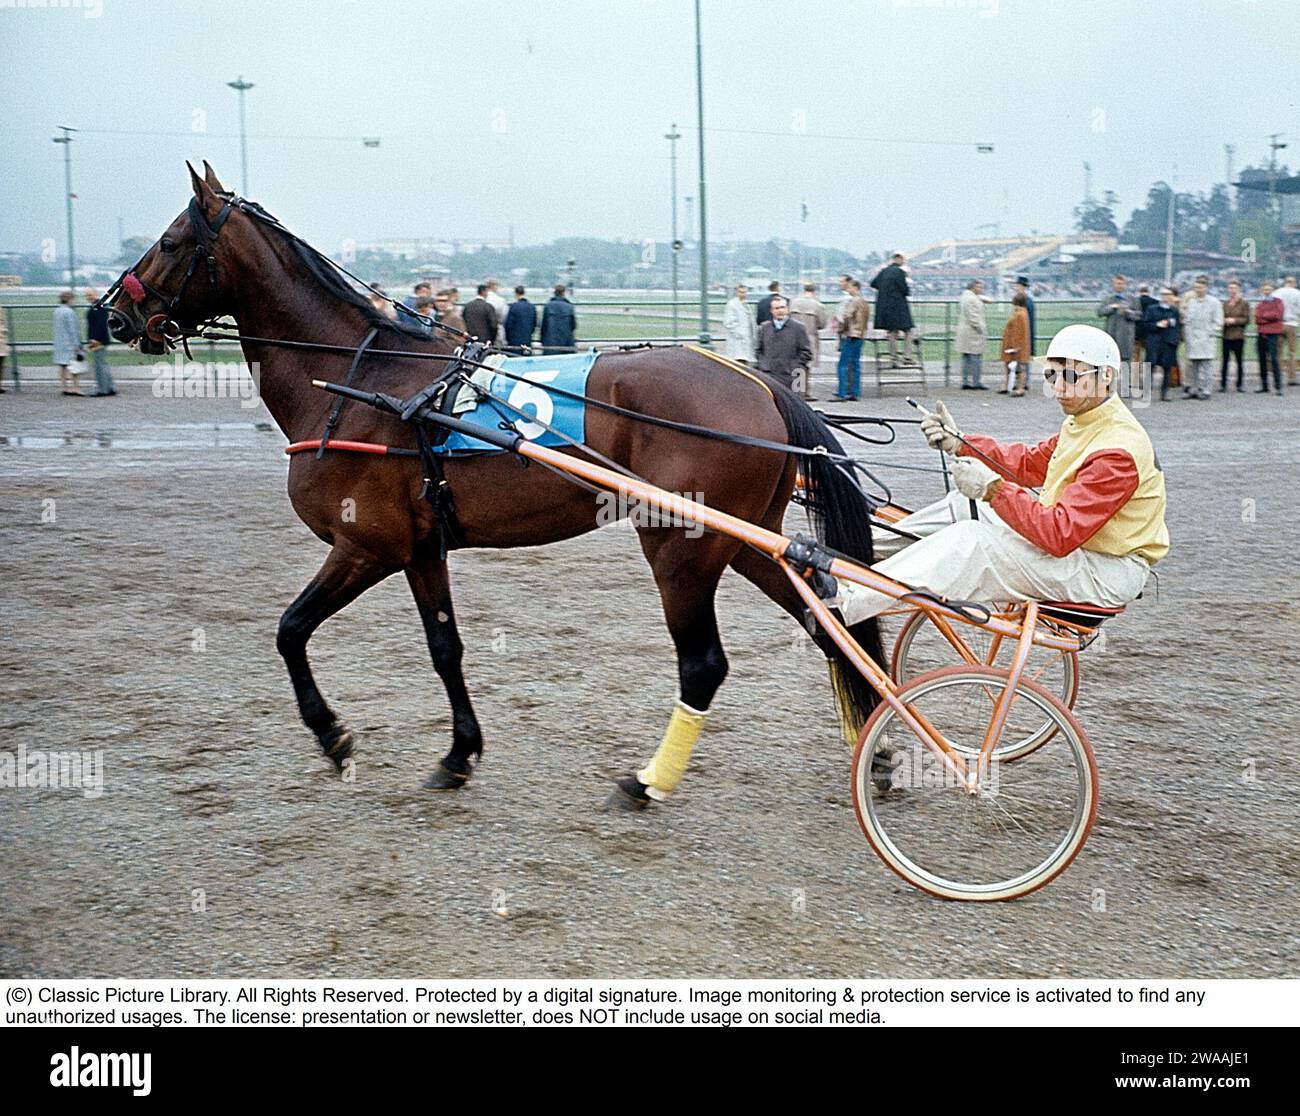 Olle Elfstrand. Swedish trotting trainer and jockey. During his career he has managed the feat of winning over 2000 races as a jockey. Here in the sulky with the trotting horse Lyon that he trained for most of his racing career. Lyon was selected as Horse of the Year three times and became the first Swedish-born trotting horse to reach a million swedish crowns in prize money. 1972 ref BV9 Stock Photo